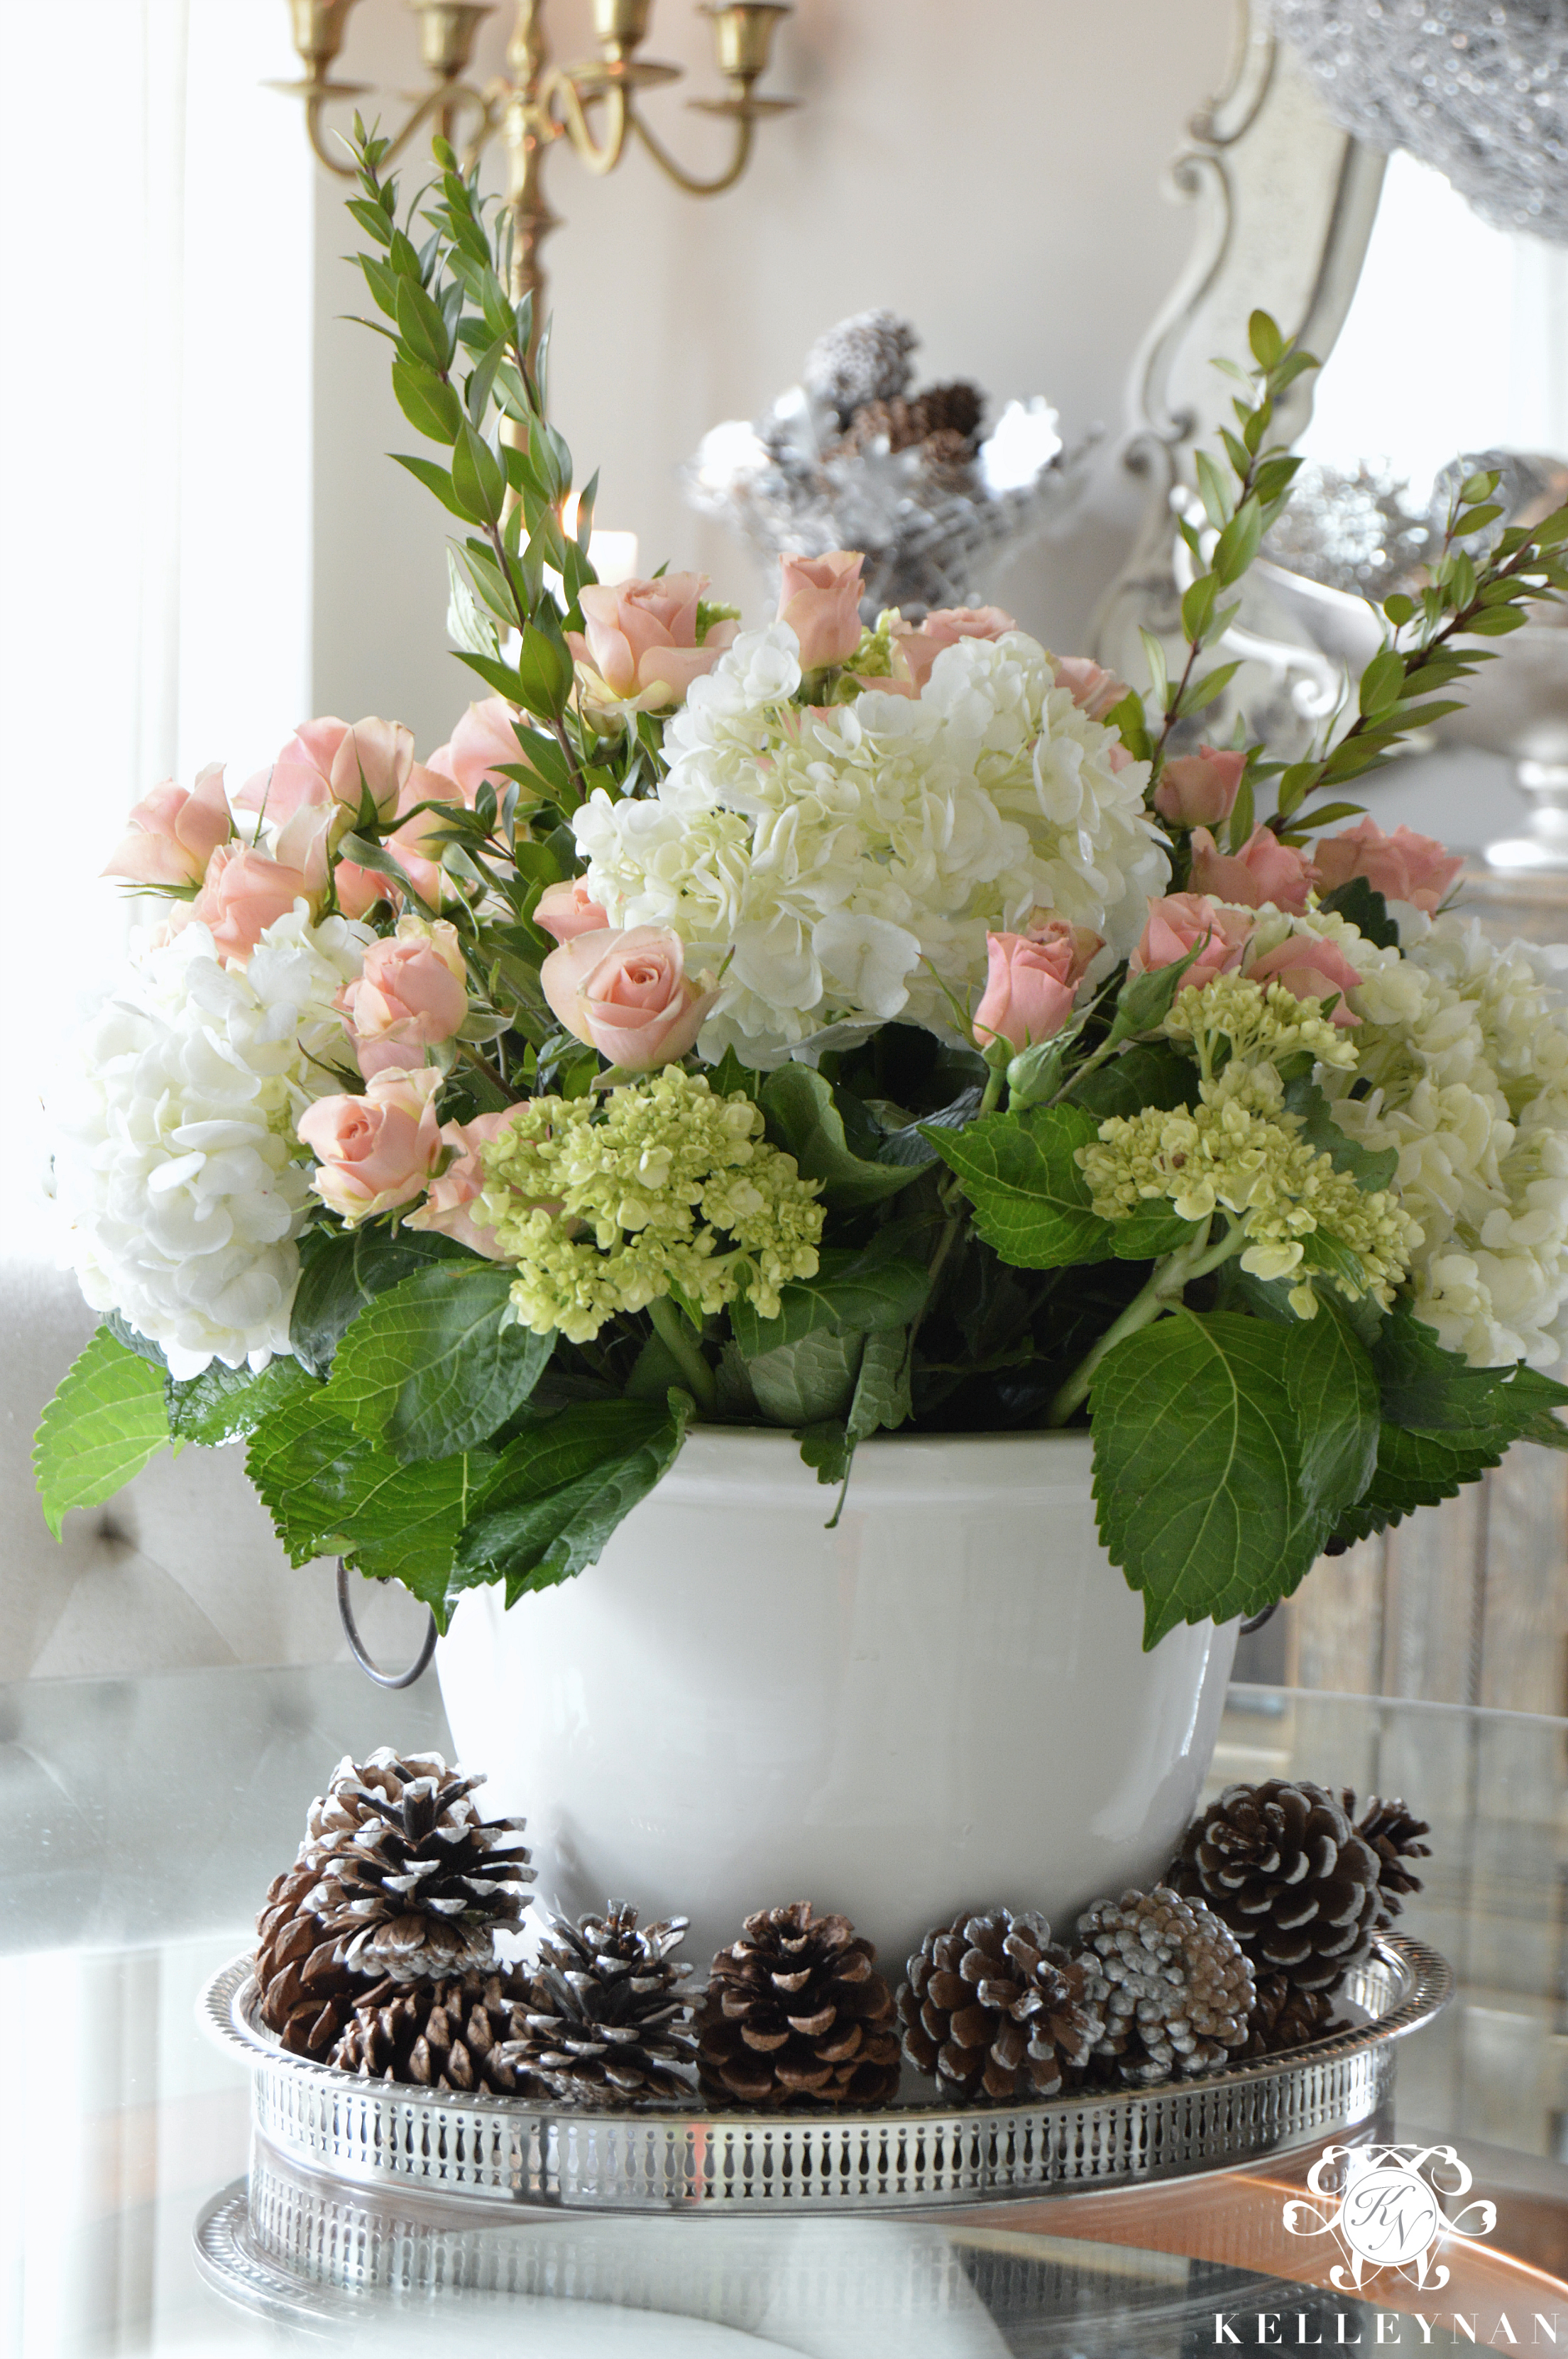 Flower arrangement using floral foam, with flower bouquet wrapping 